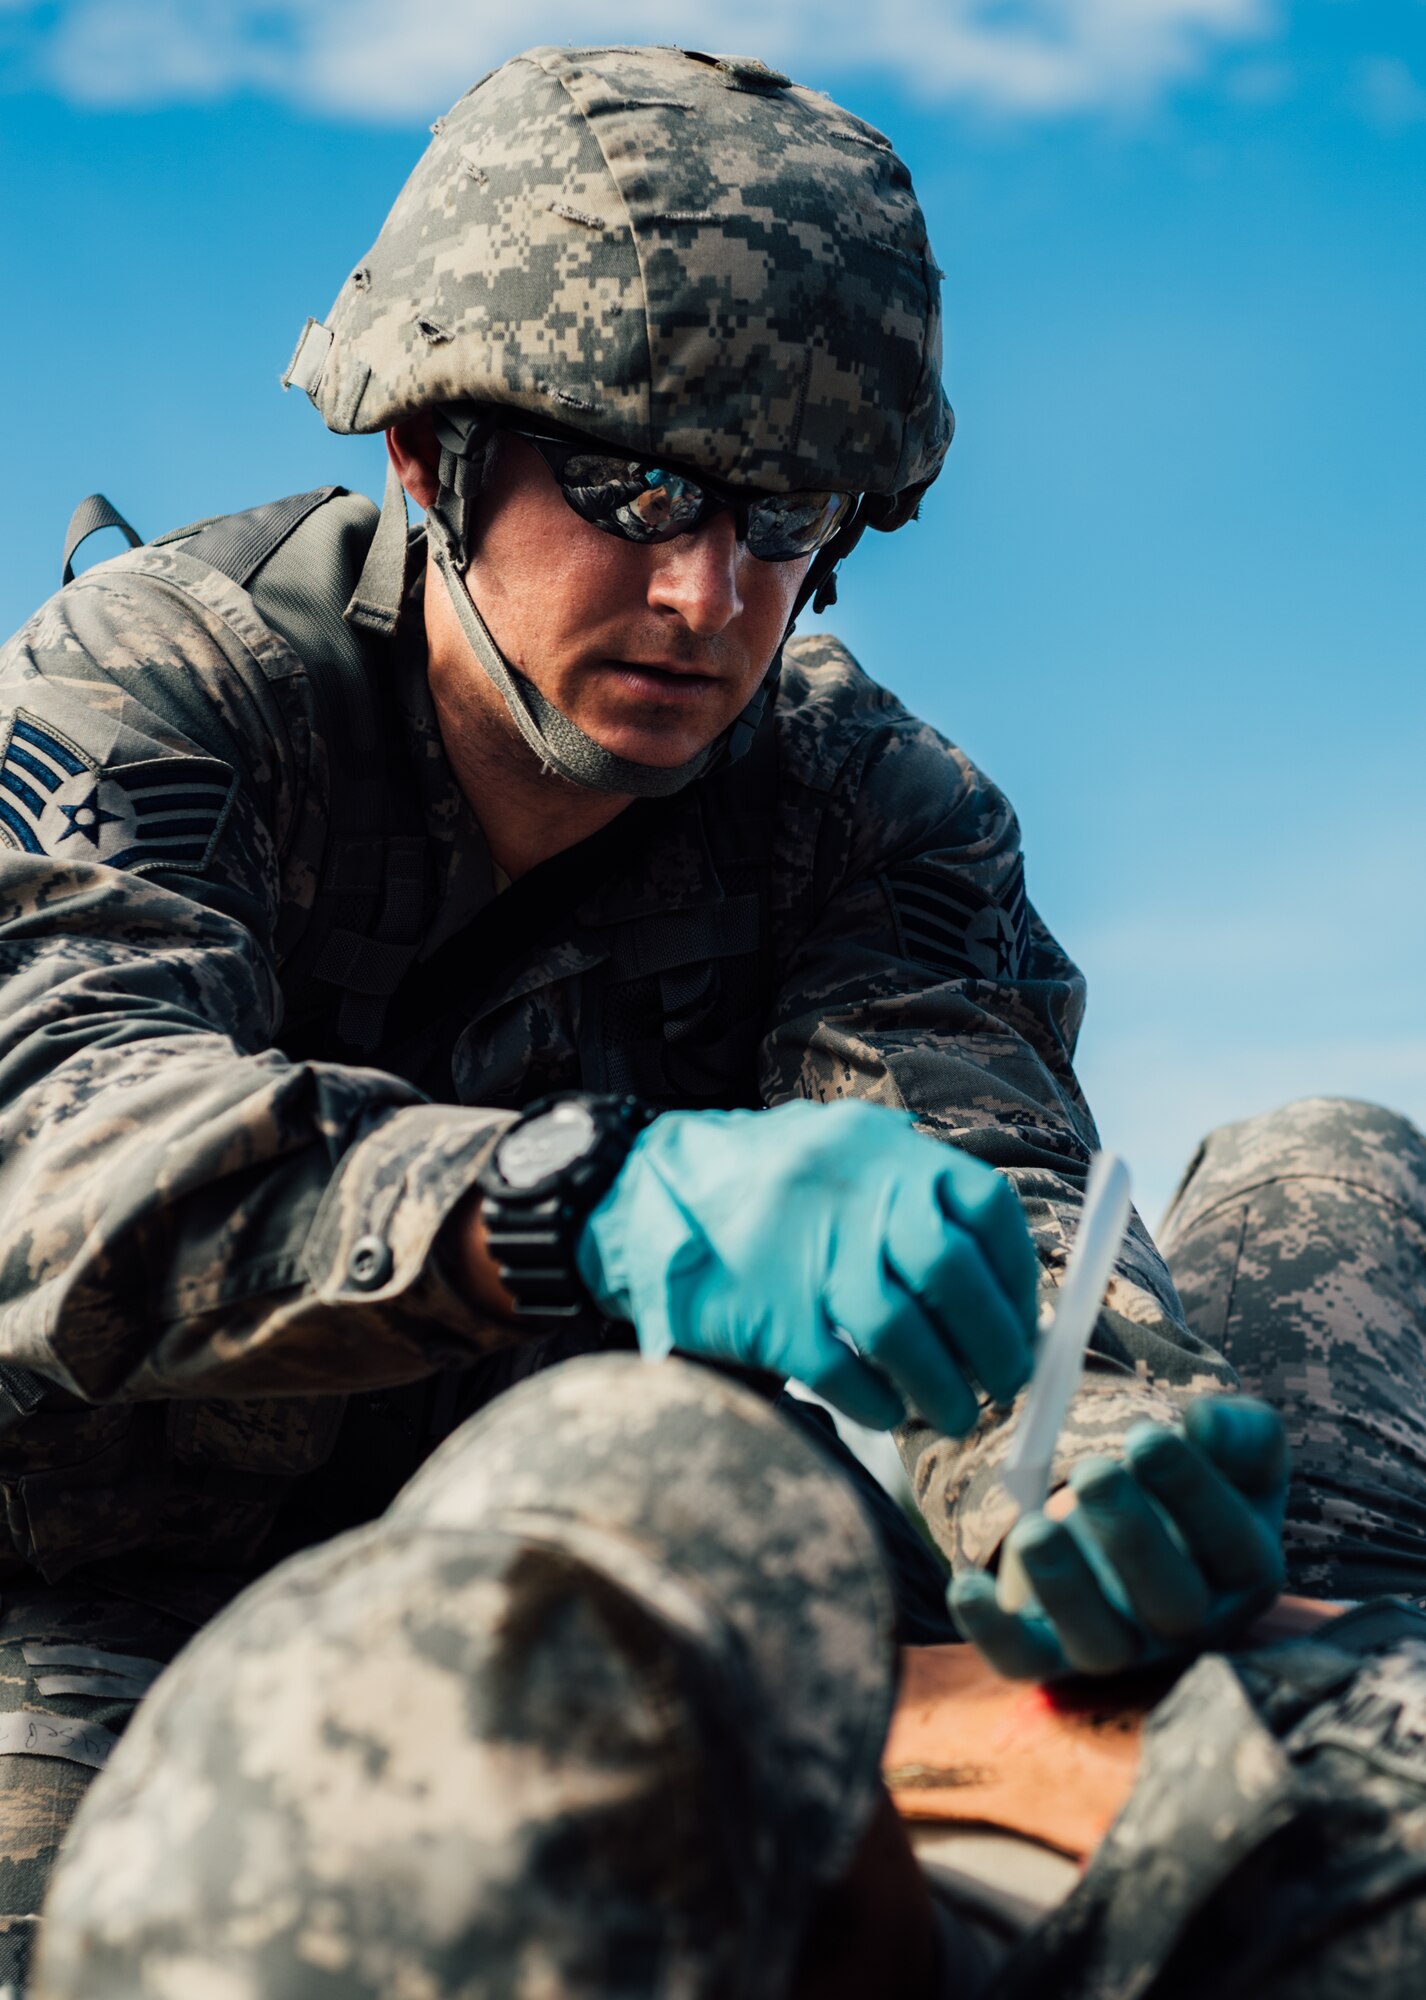 Staff Sgt. Kyle Bosshart, 446th Aeromedical Staging Squadron Expert Field Medic Badge candidate, provides medical care to a simulated patient during the EFMB course at Joint Base Lewis-McChord, Wash., Sept. 24, 2015. In June 1965, the U.S. Army expanded its awards program by implementing the EFMB for combat medics who do not see battle. (U.S. Air Force photo by Senior Airman Jordan Castelan/Released)